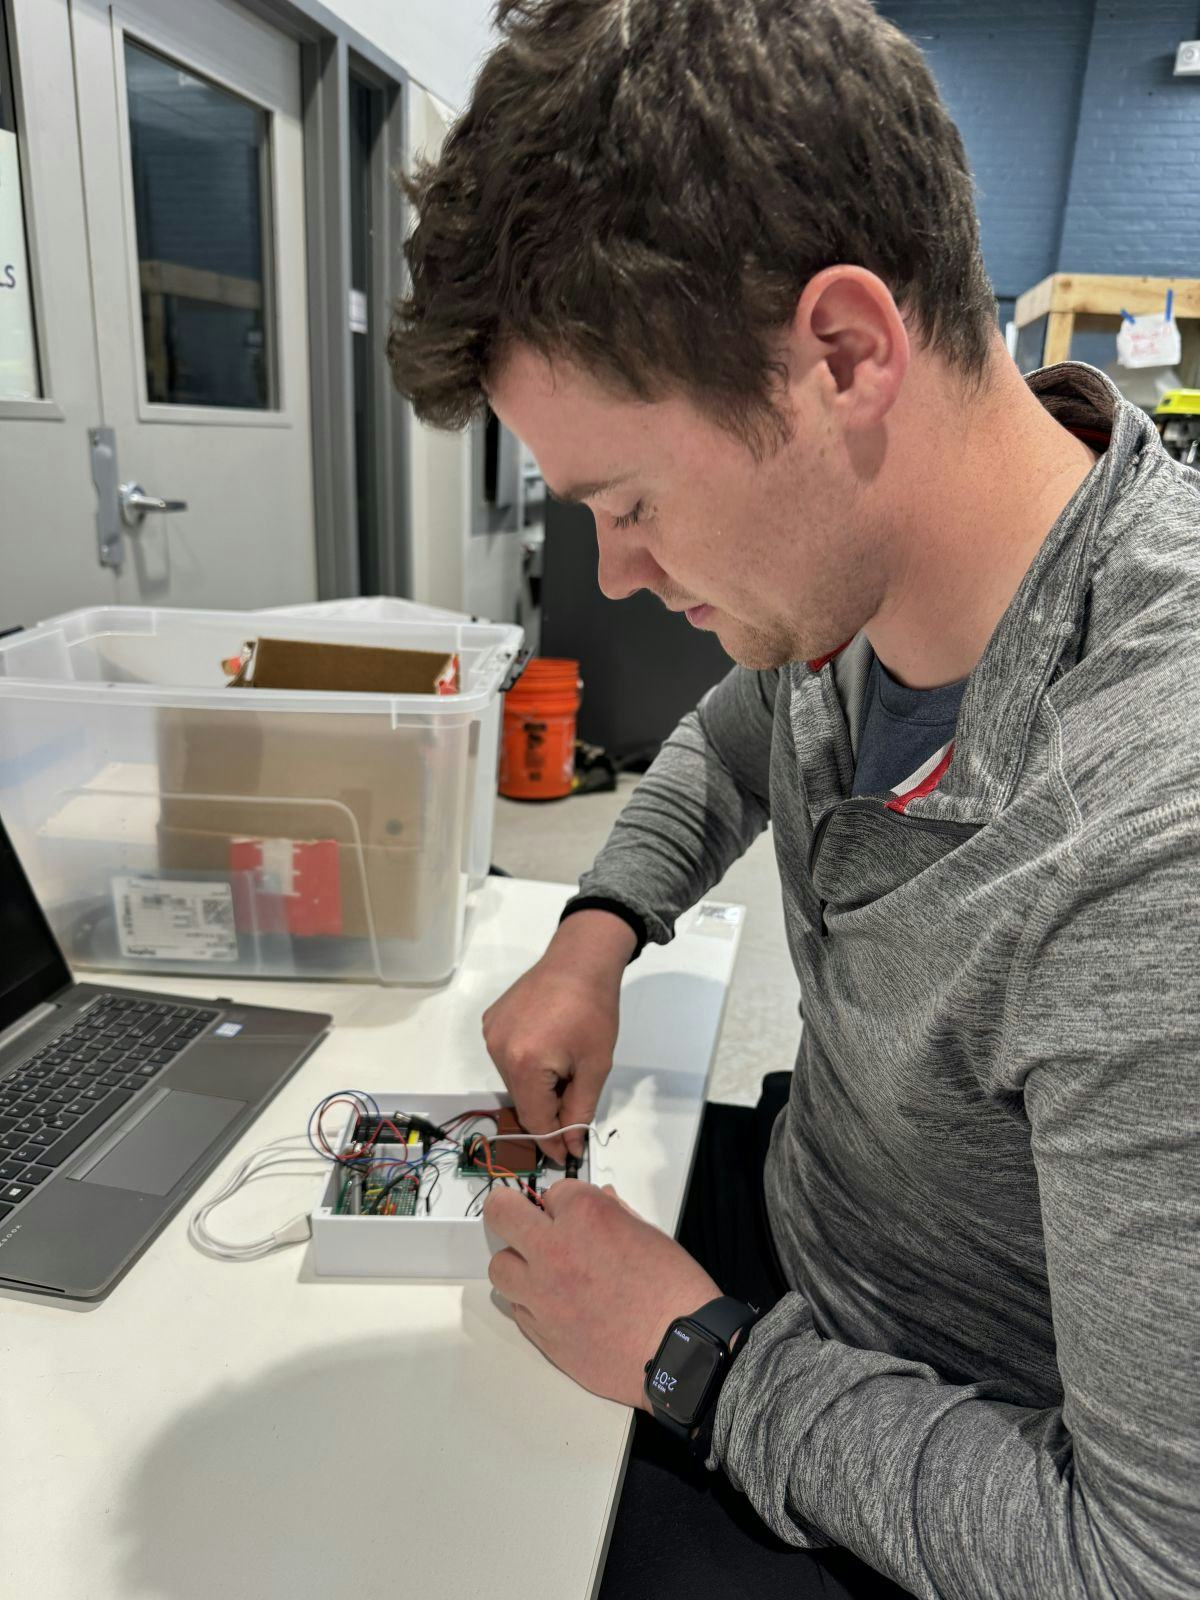 A male student in a gray sweater sits at a desk in a lab. On the desk is an open laptop. In his hands, the student is assembling the MedFlex device.